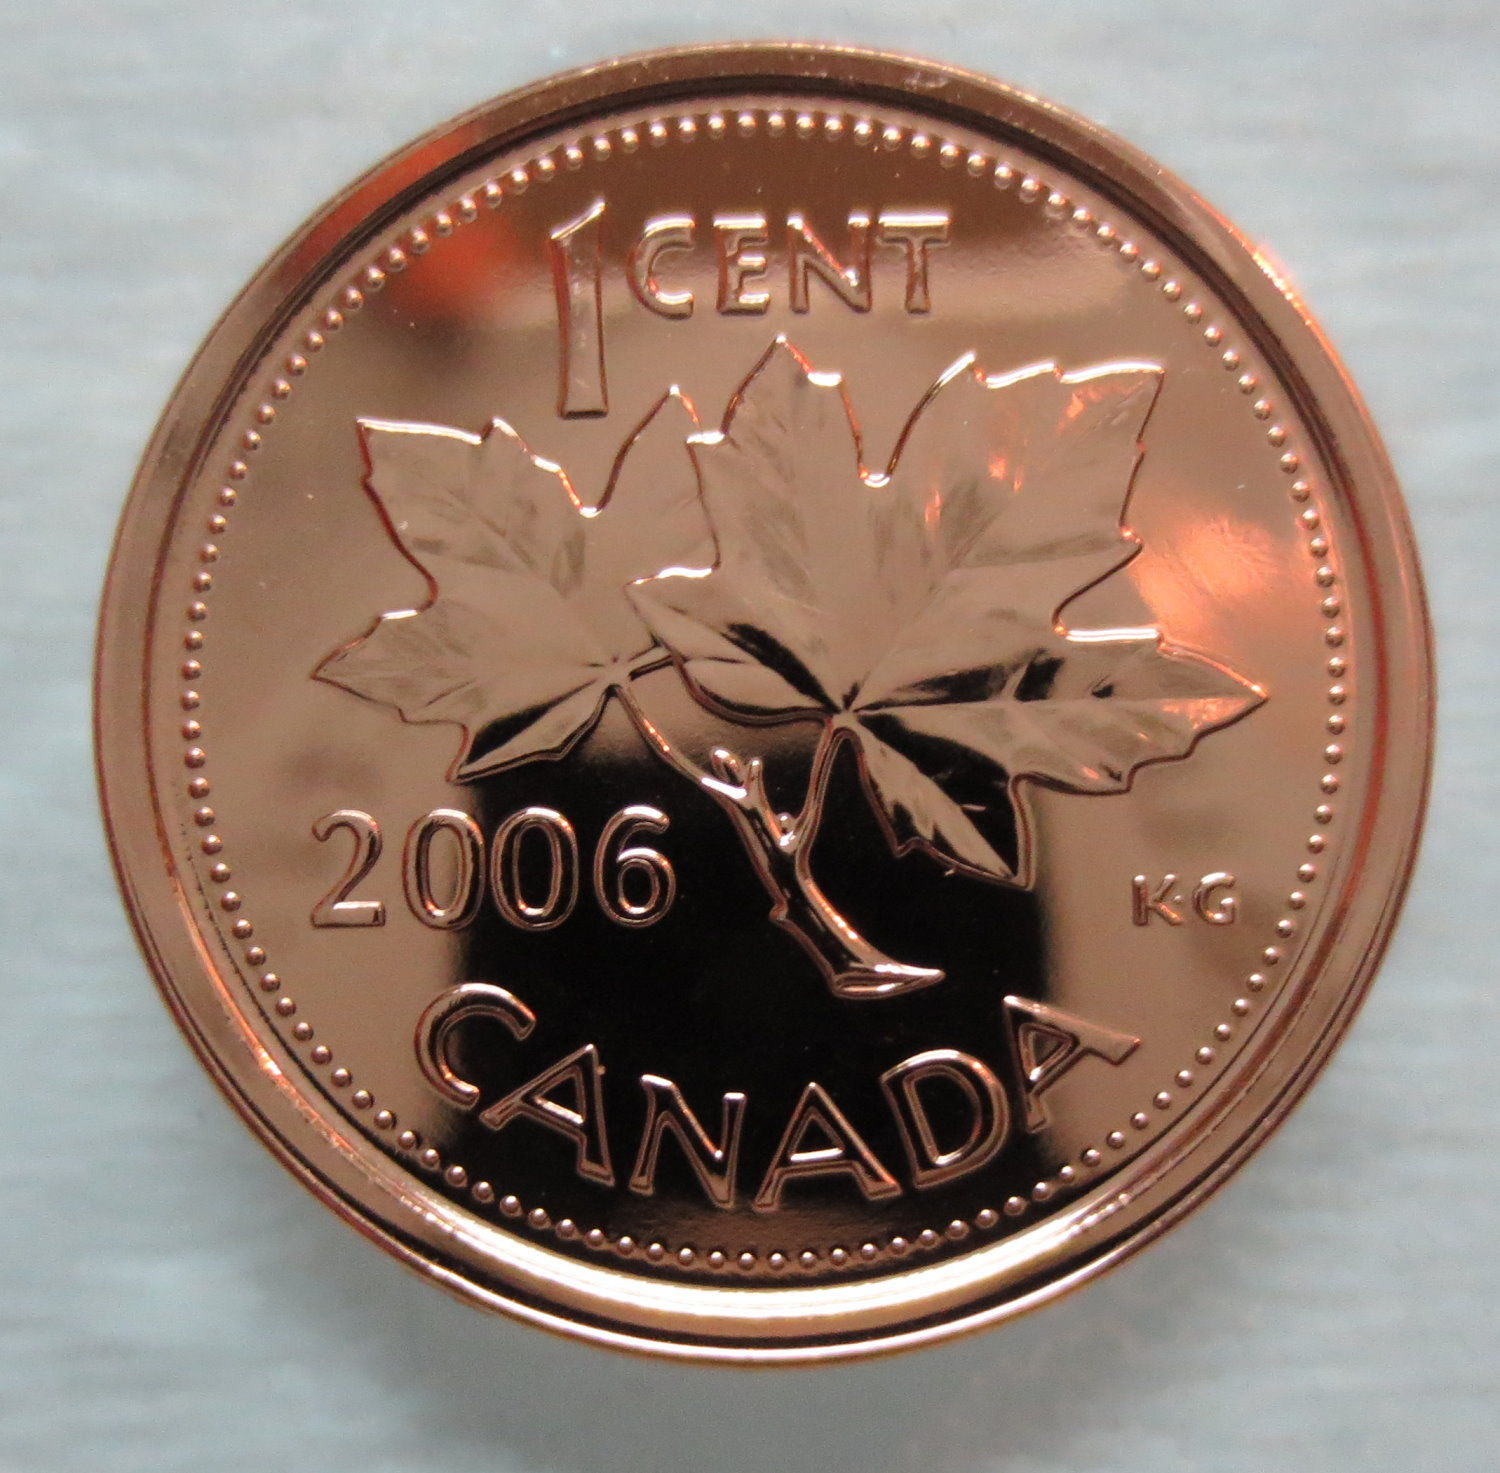 2006P CANADA 1 CENT STEEL PROOF-LIKE MAGNETIC PENNY - A